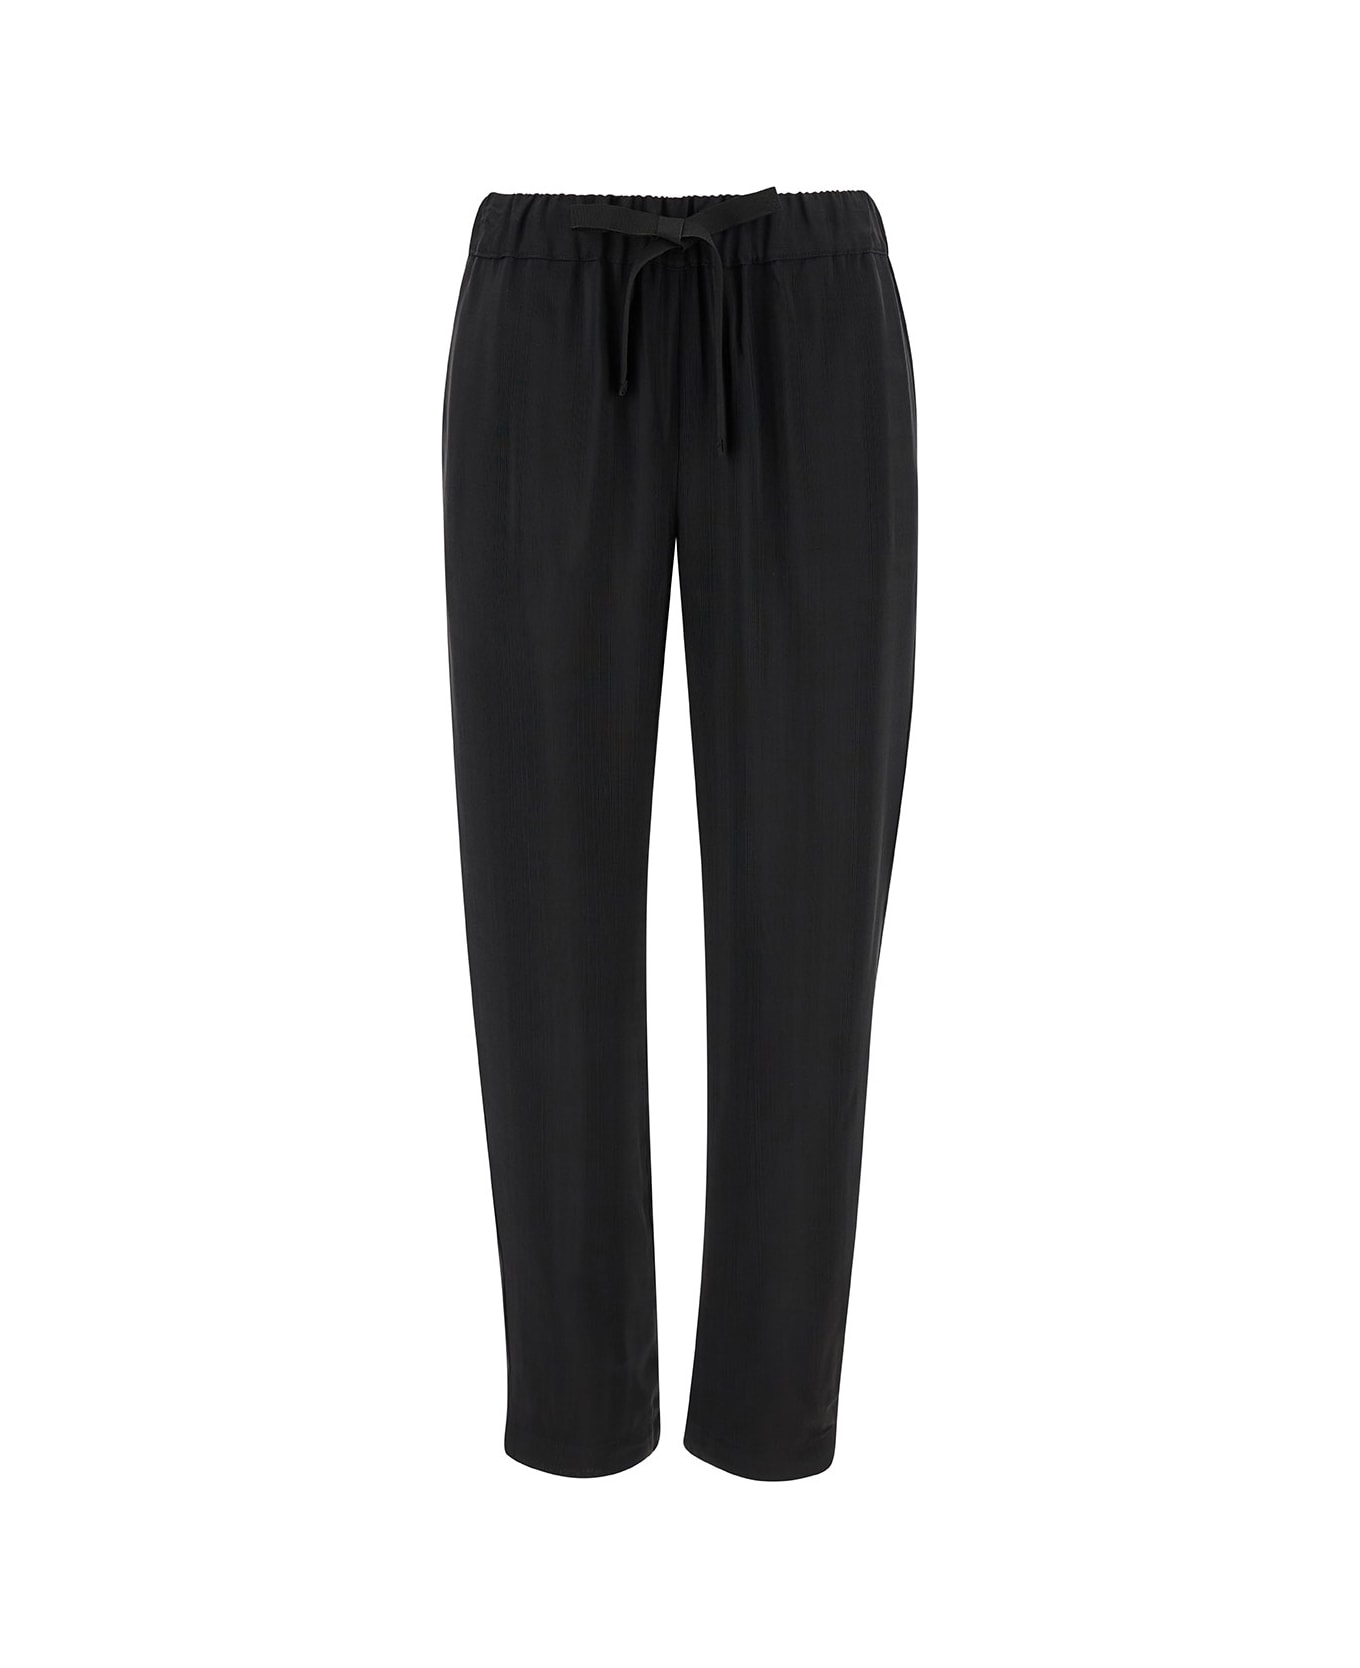 SEMICOUTURE Black Pants With Drawstring Closure In Viscose Woman - Black